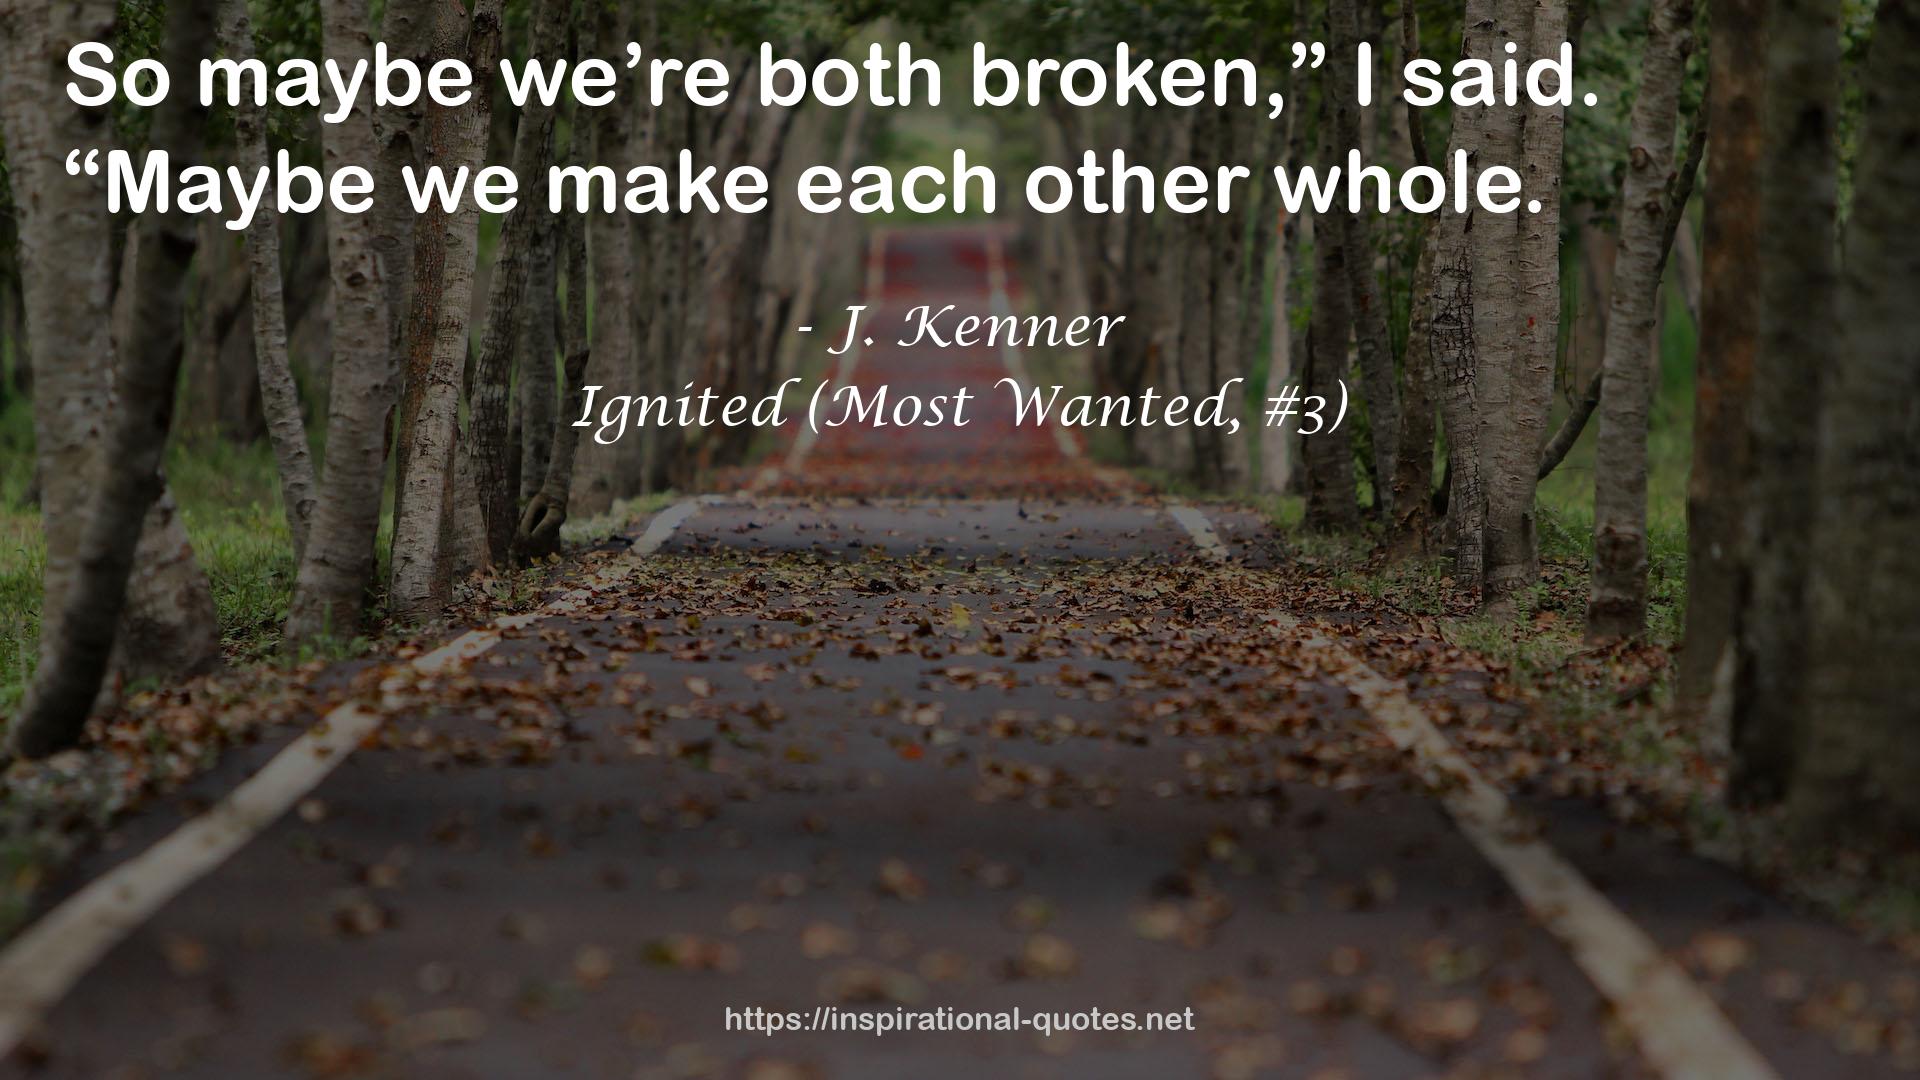 Ignited (Most Wanted, #3) QUOTES